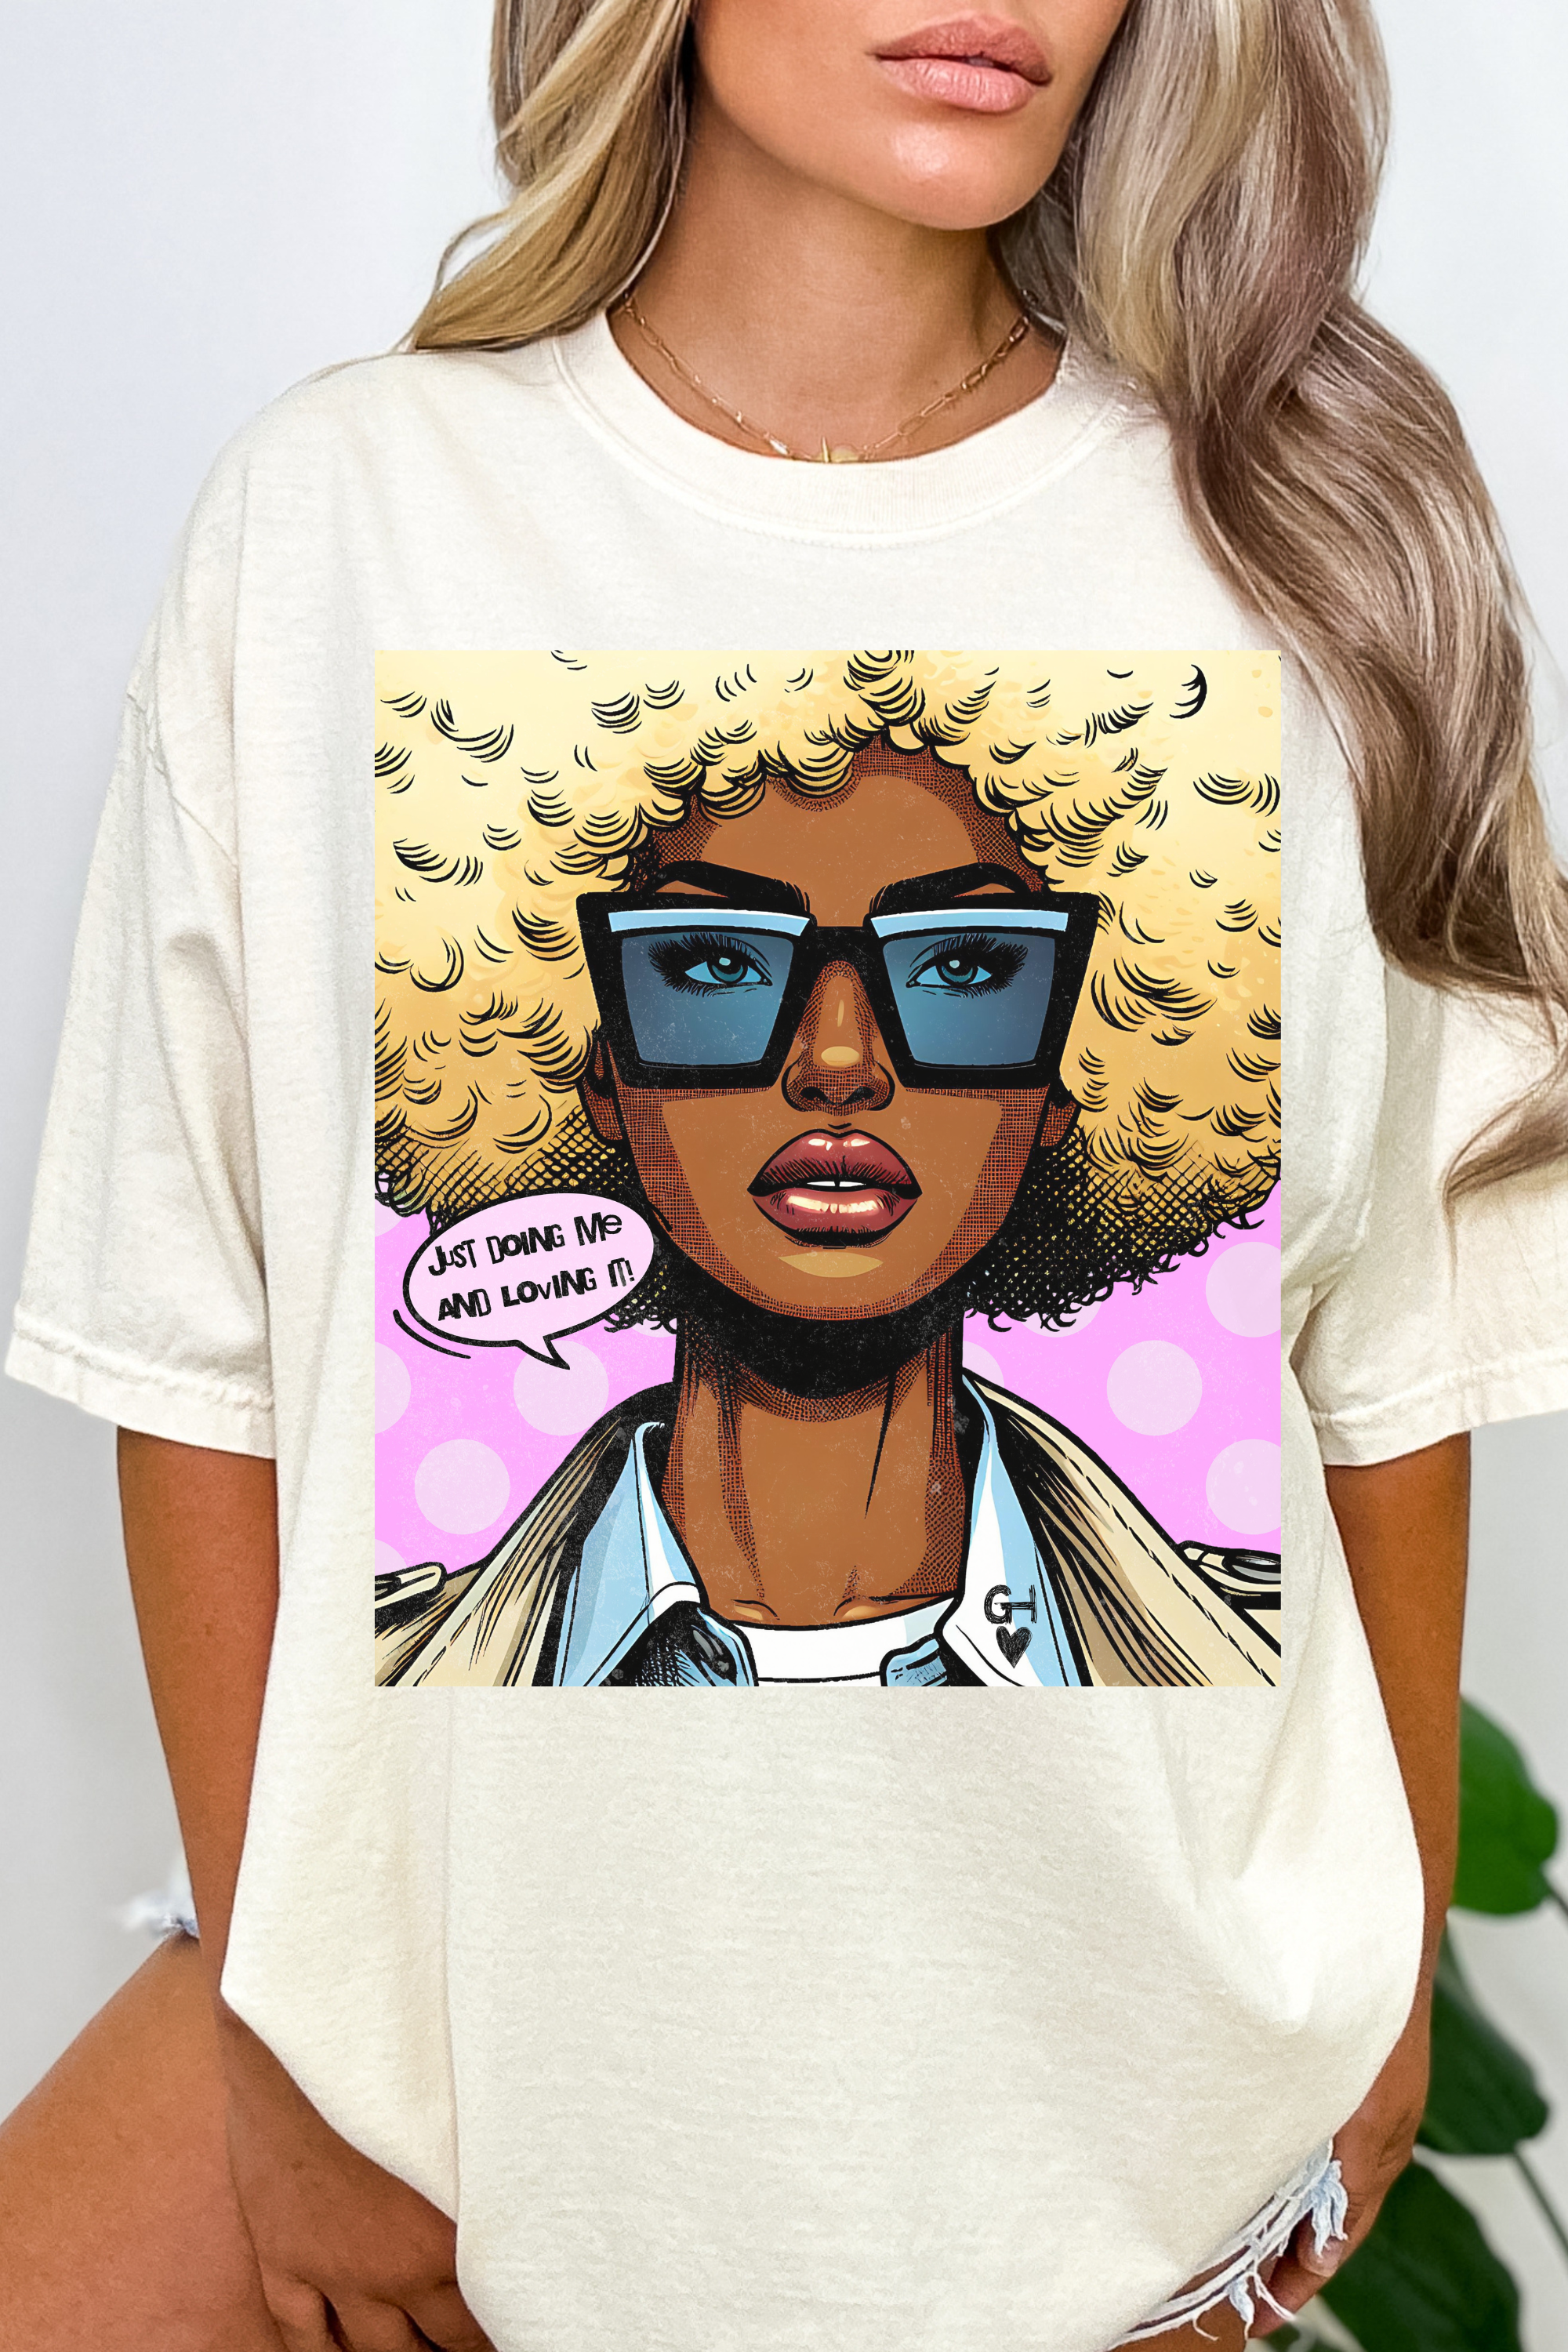 GOLDxTEAL's exclusive  stylish comic cartoon graphic T-shirt.